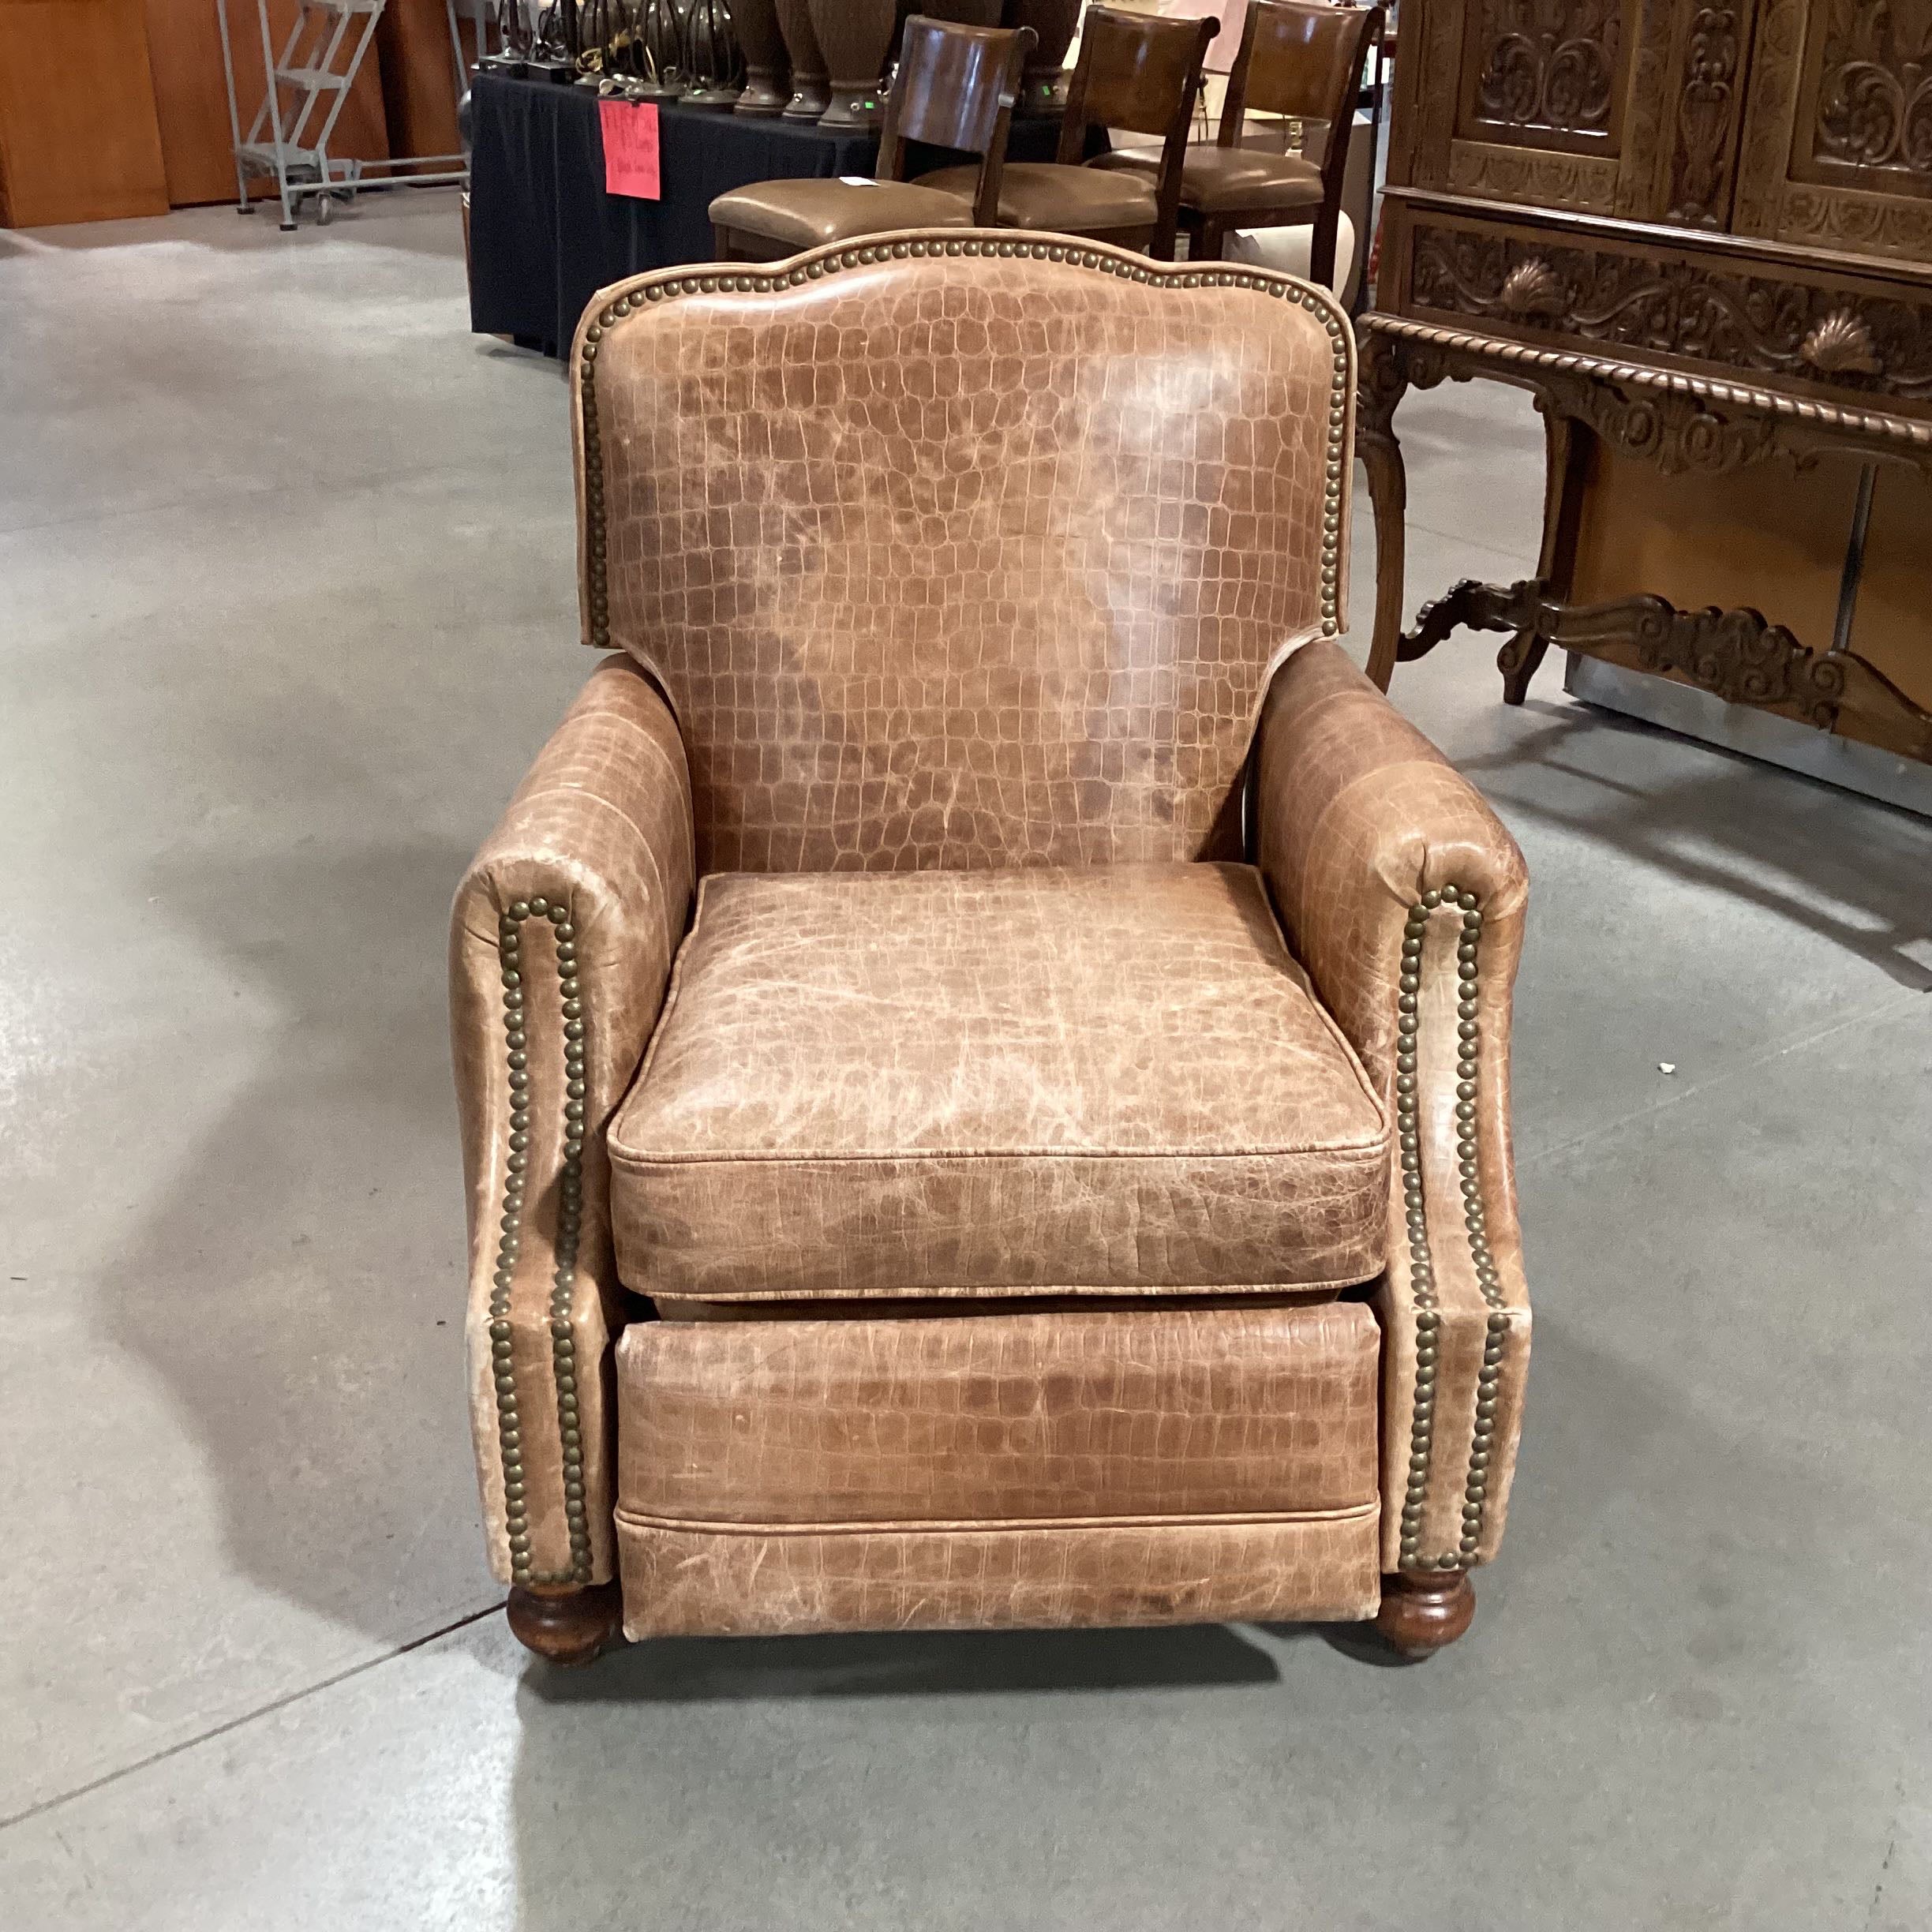 Barcalounger Snake Embossed Nailhead Accent Distressed Leather Reclining Chair